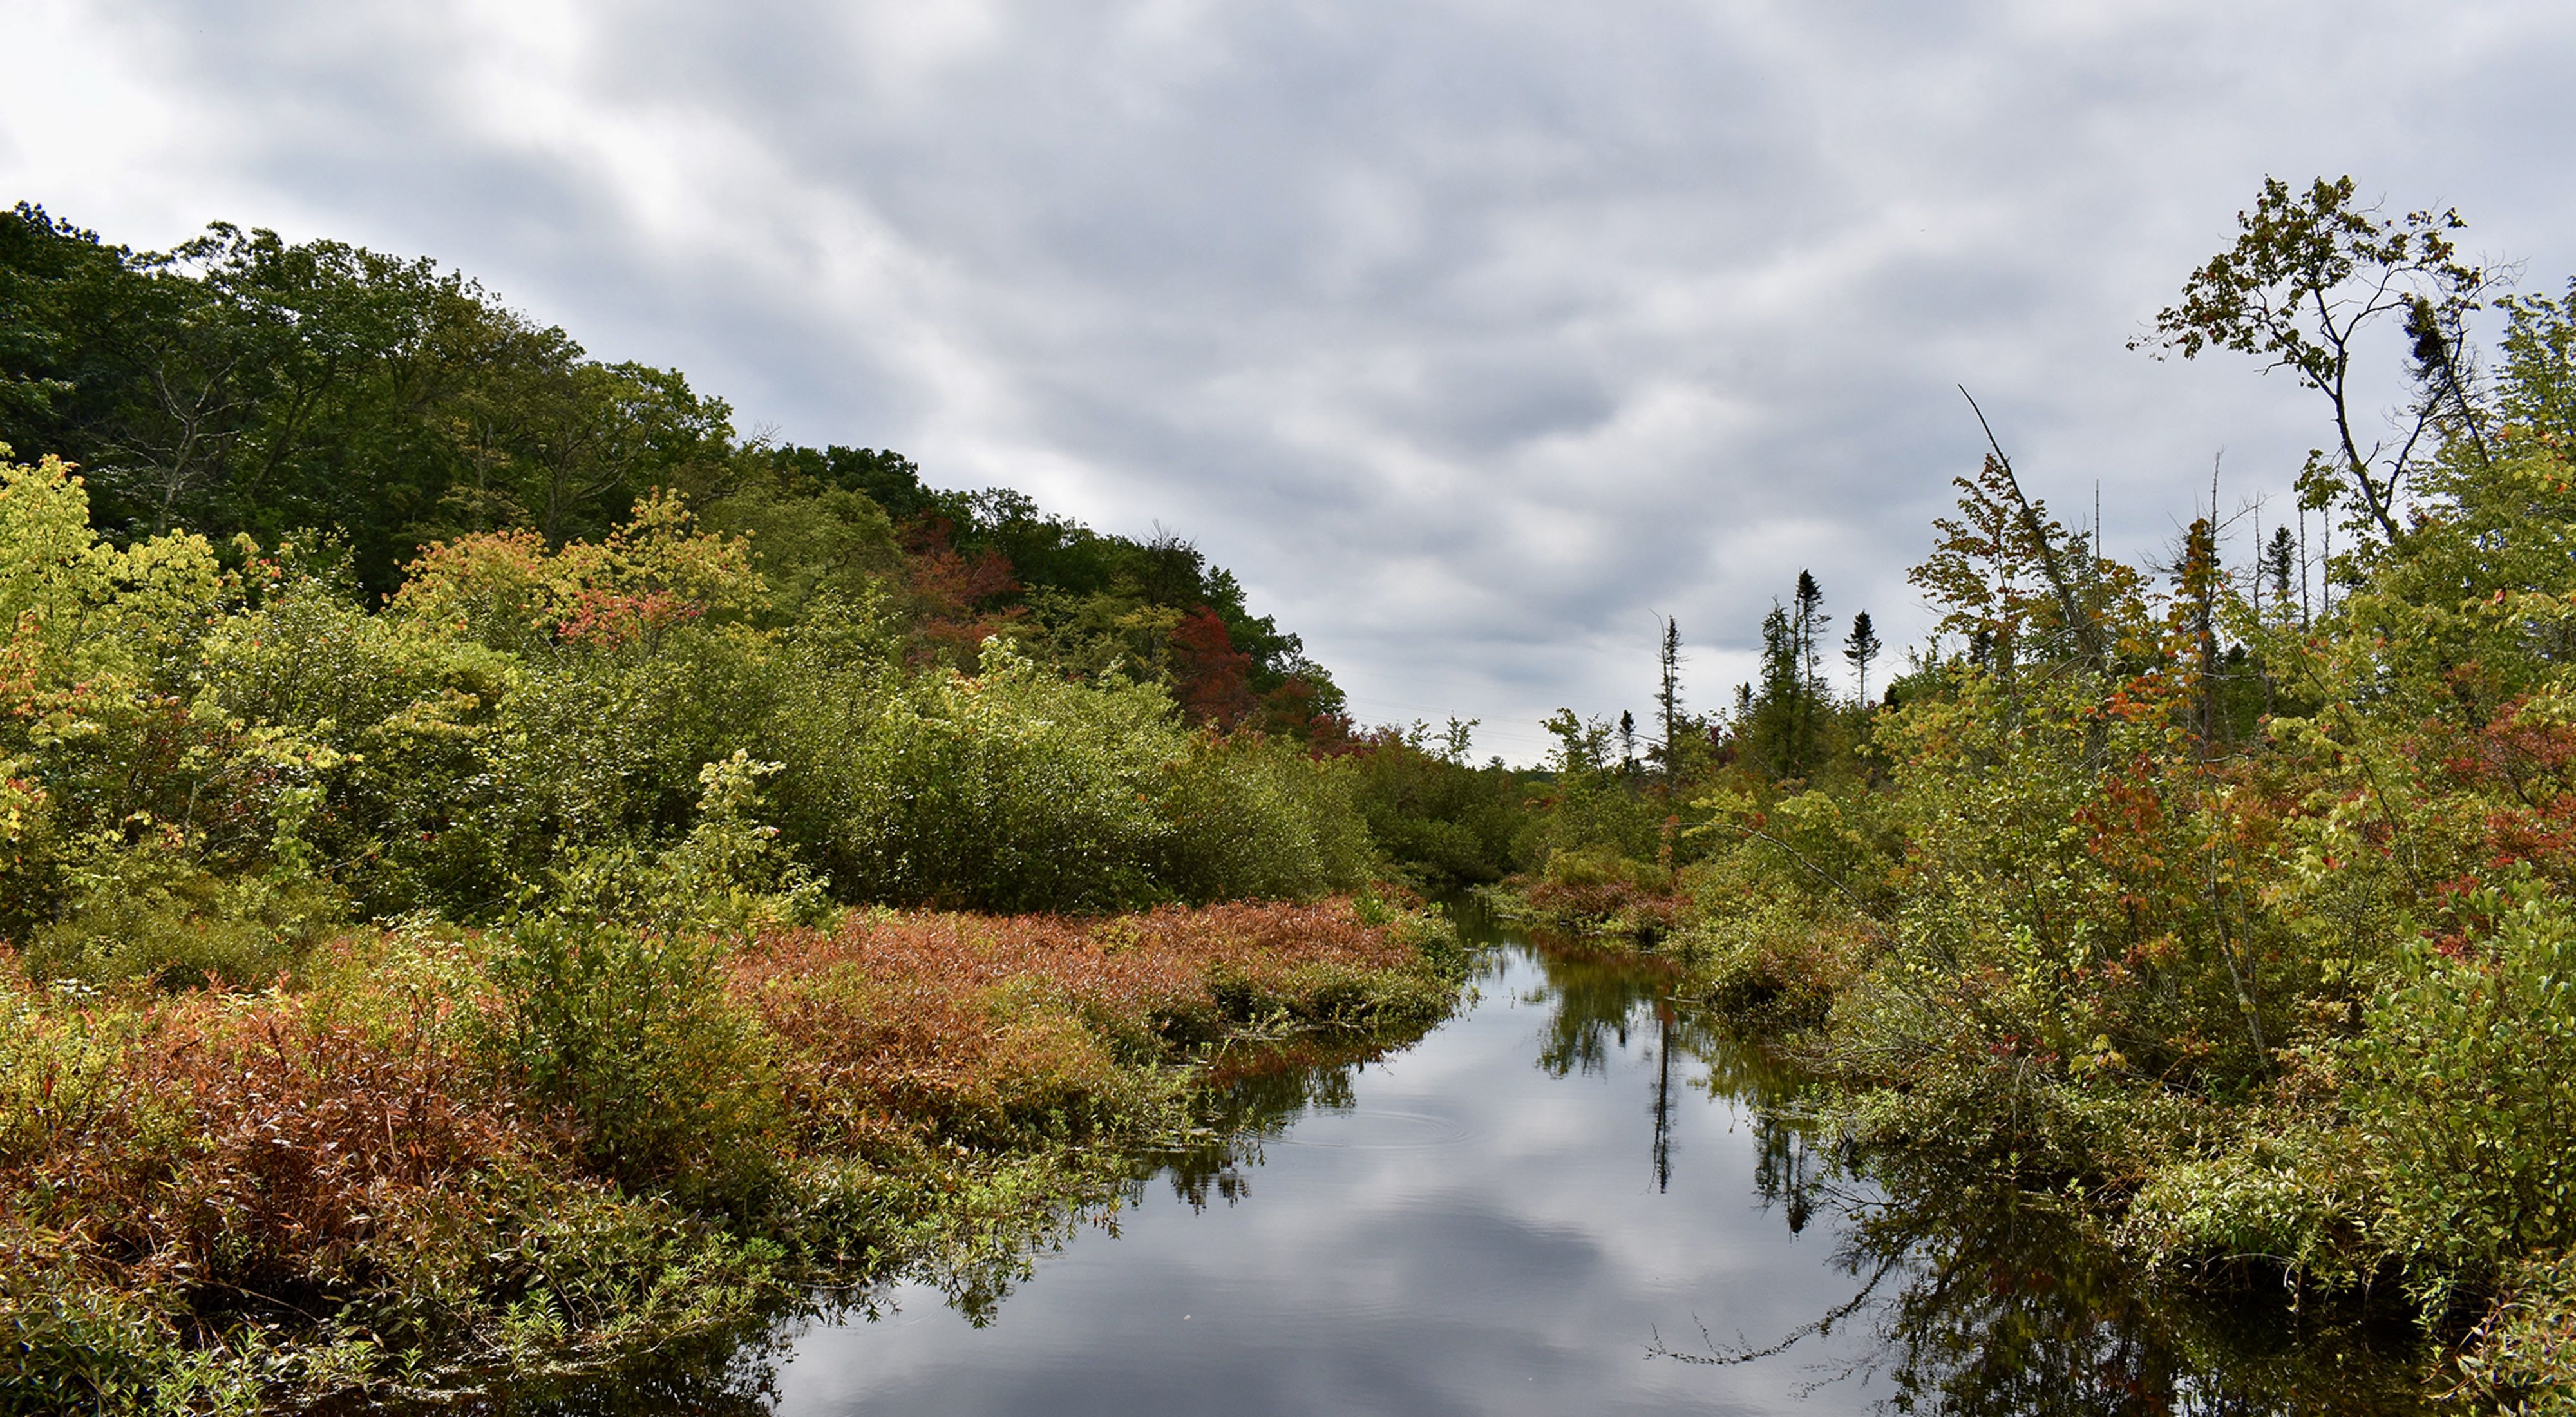 A wide stream of water flows between heavily vegetated banks of tall, woody bushes. The still surface of the water reflects the heavy, low clouds above.